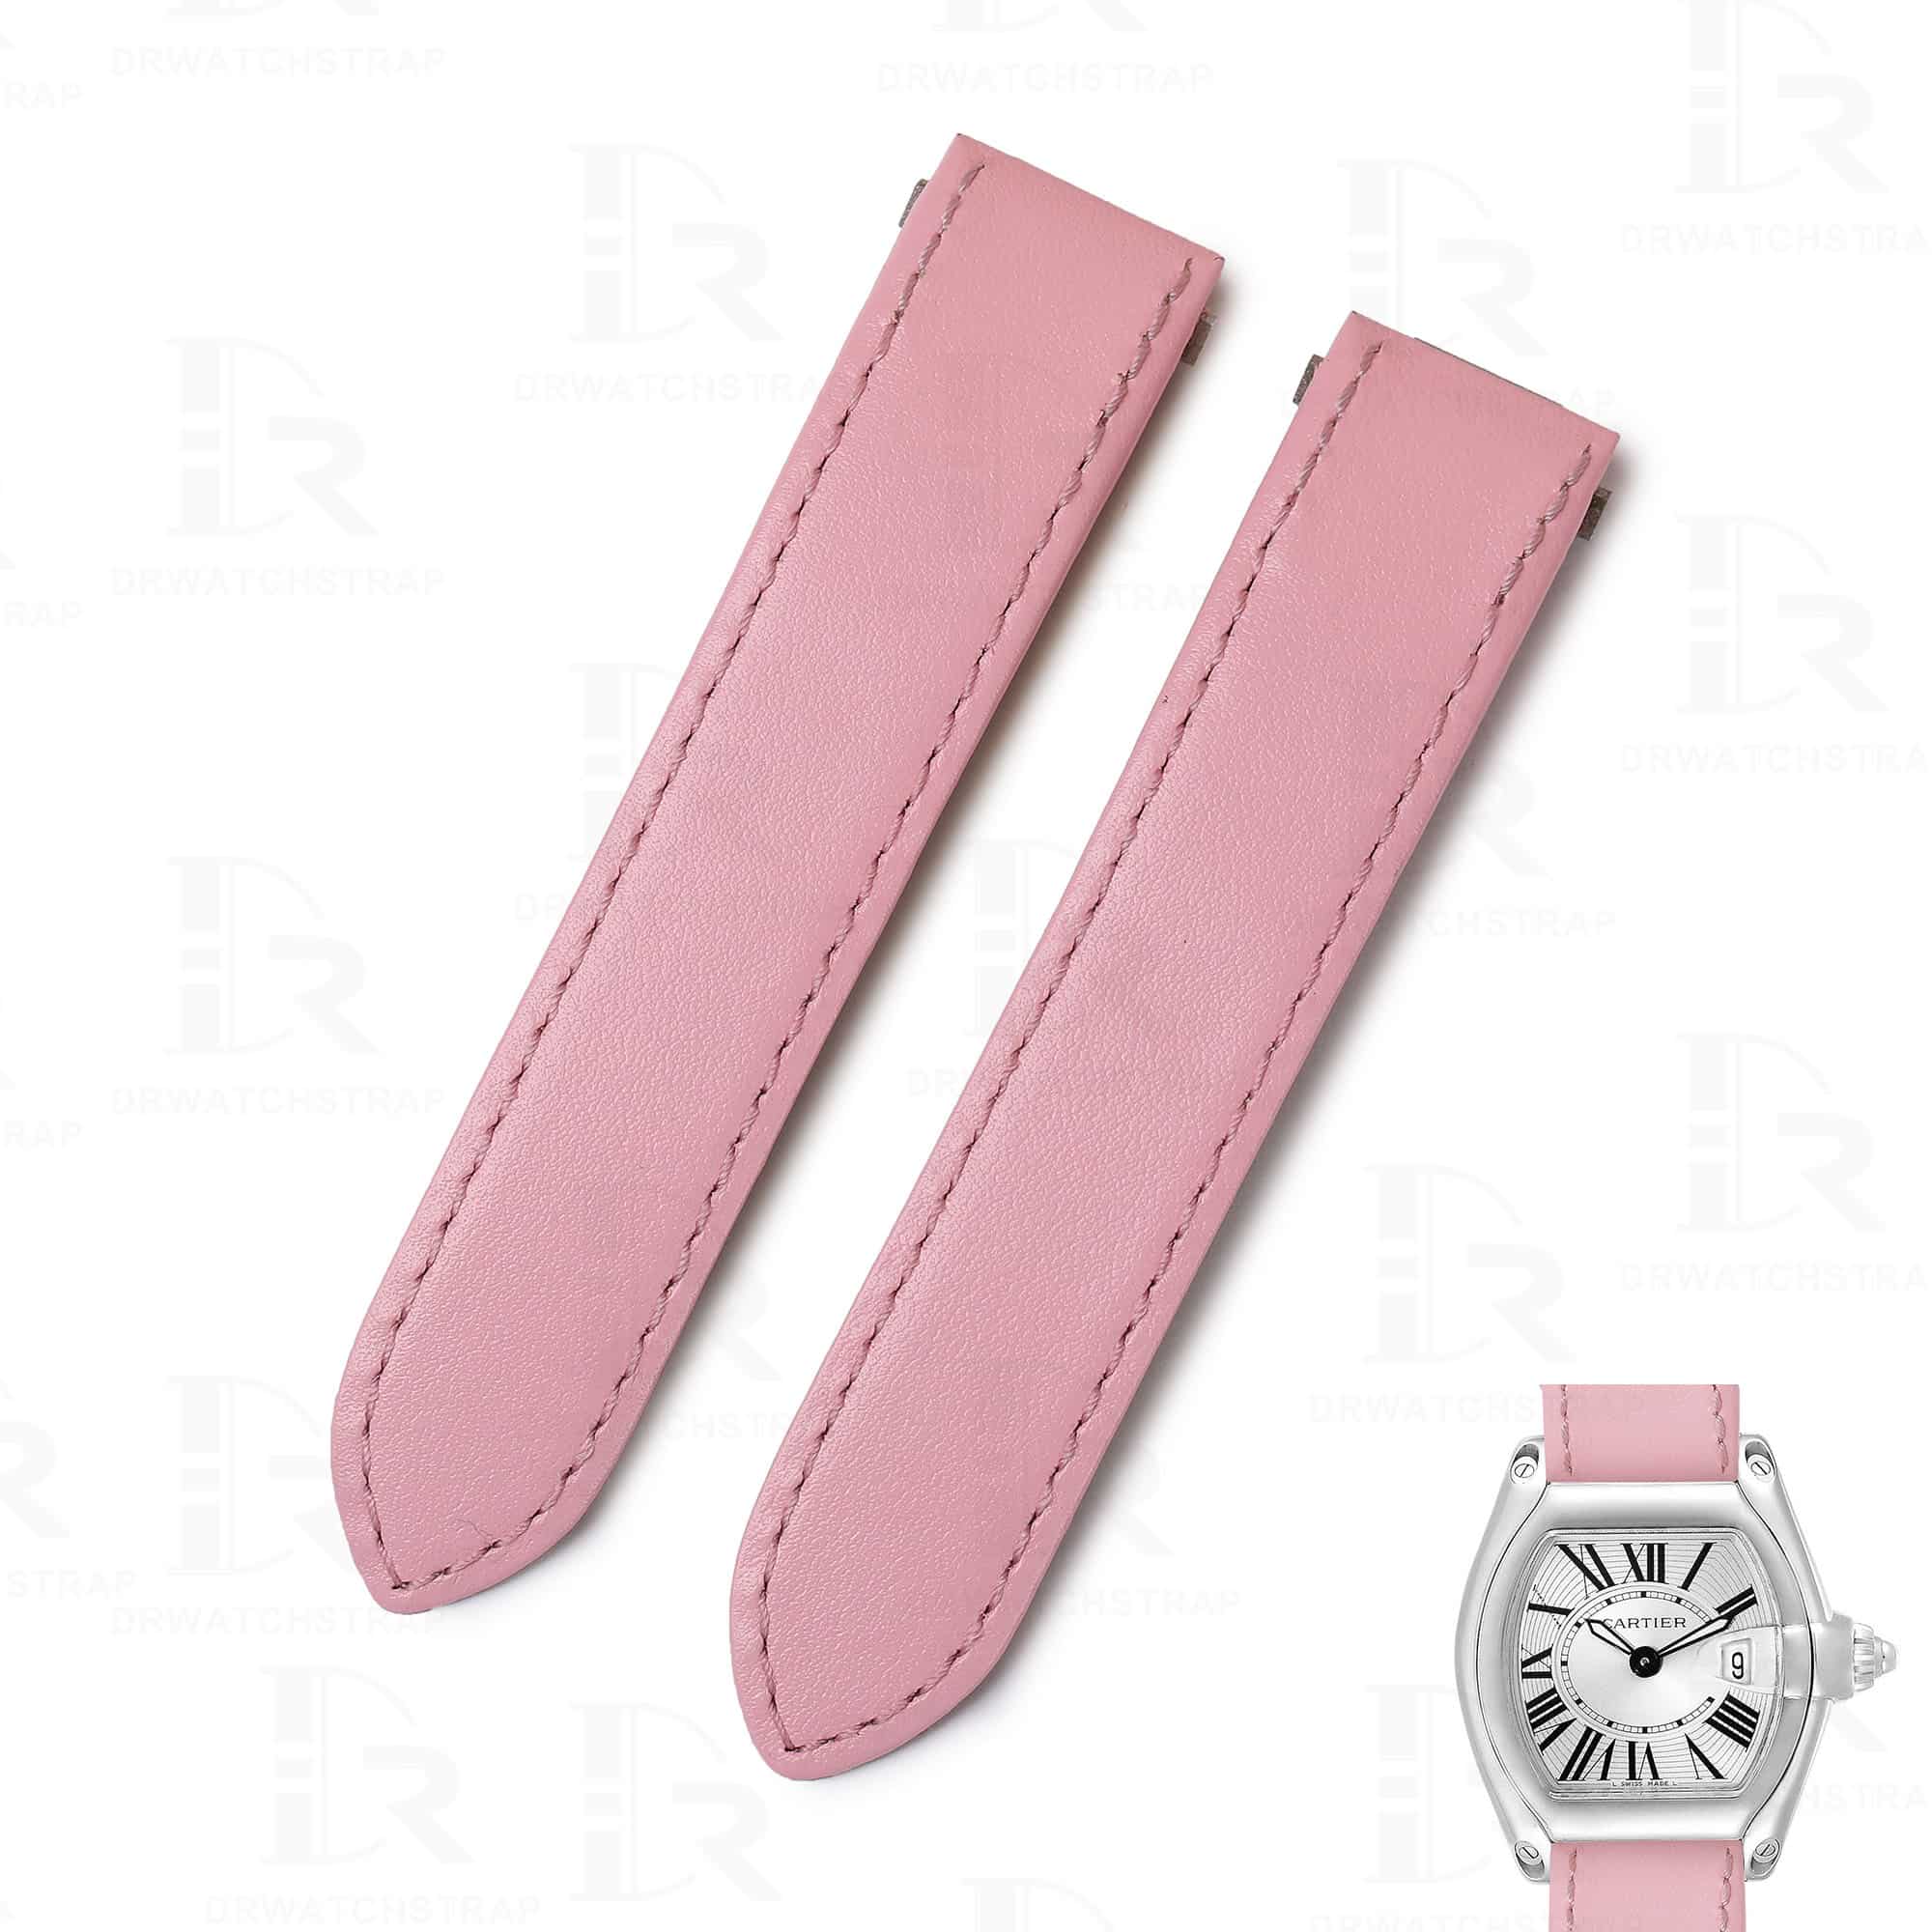 Genuine best quality calfskin material handmade Pink leather watch strap and watch band replacement for Cartier Roadster Chronograph, XL, 2510, GMT 19mm 20mm mens and women's watches with Quickswitch system for sale - Shop the Quick release premium calf leather straps and watchbands from DR Watchstrap online at a low price